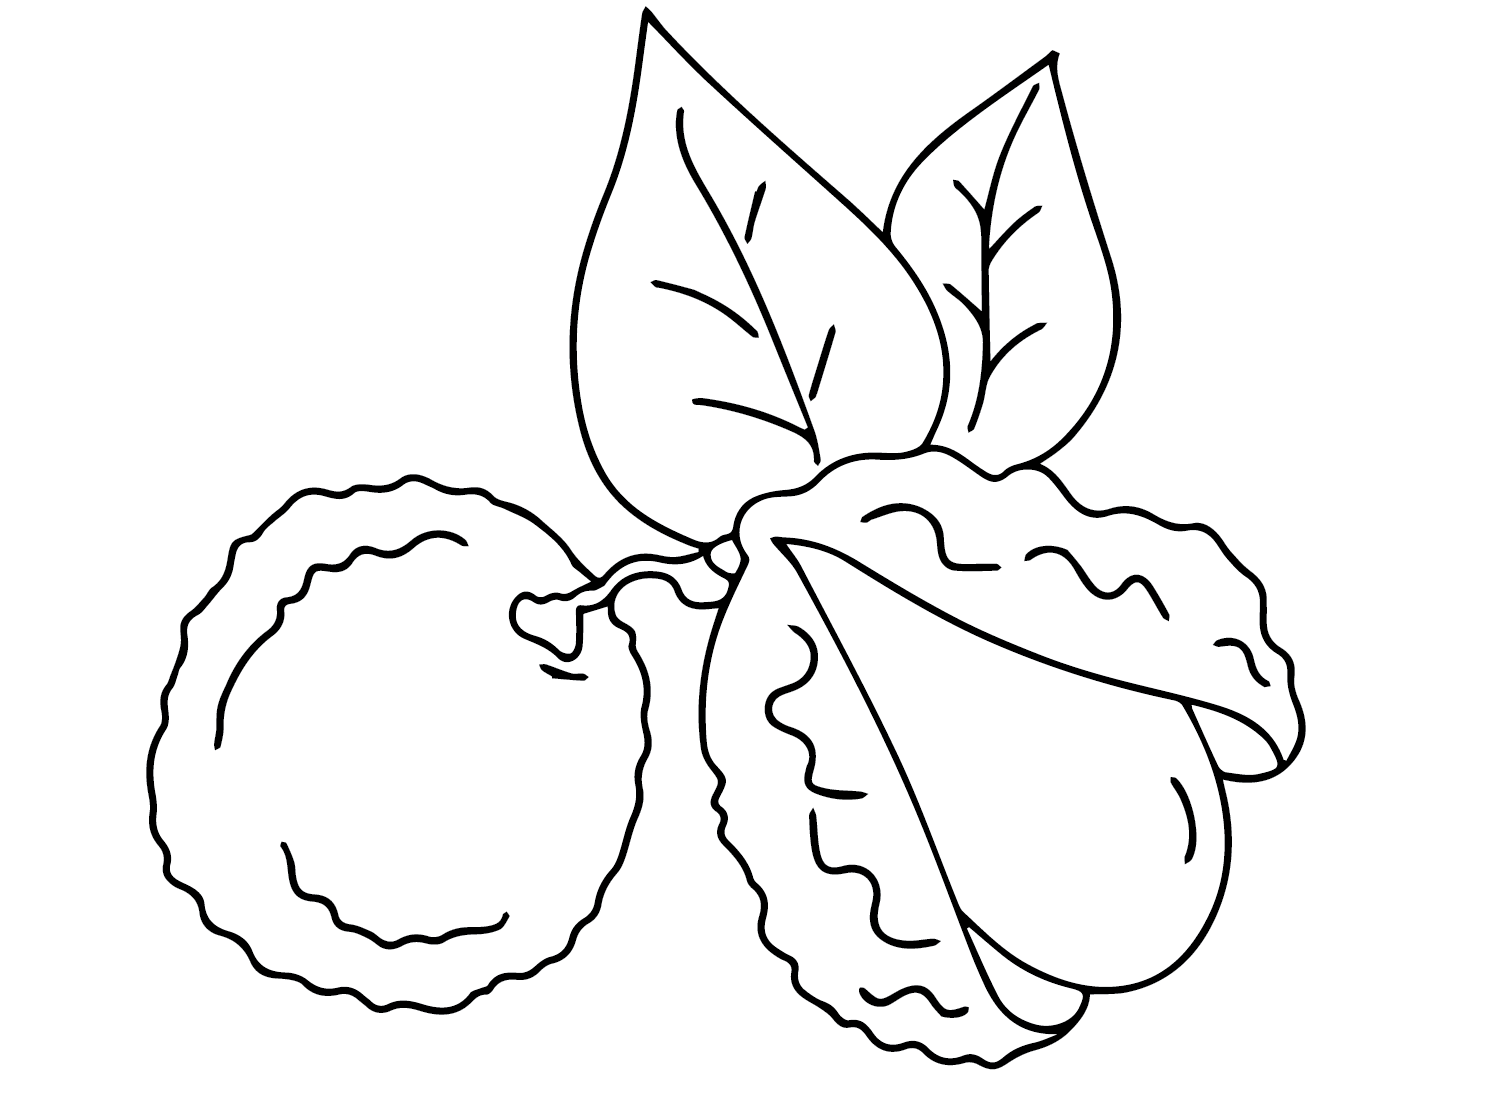 Lychee color Sheets Coloring Page